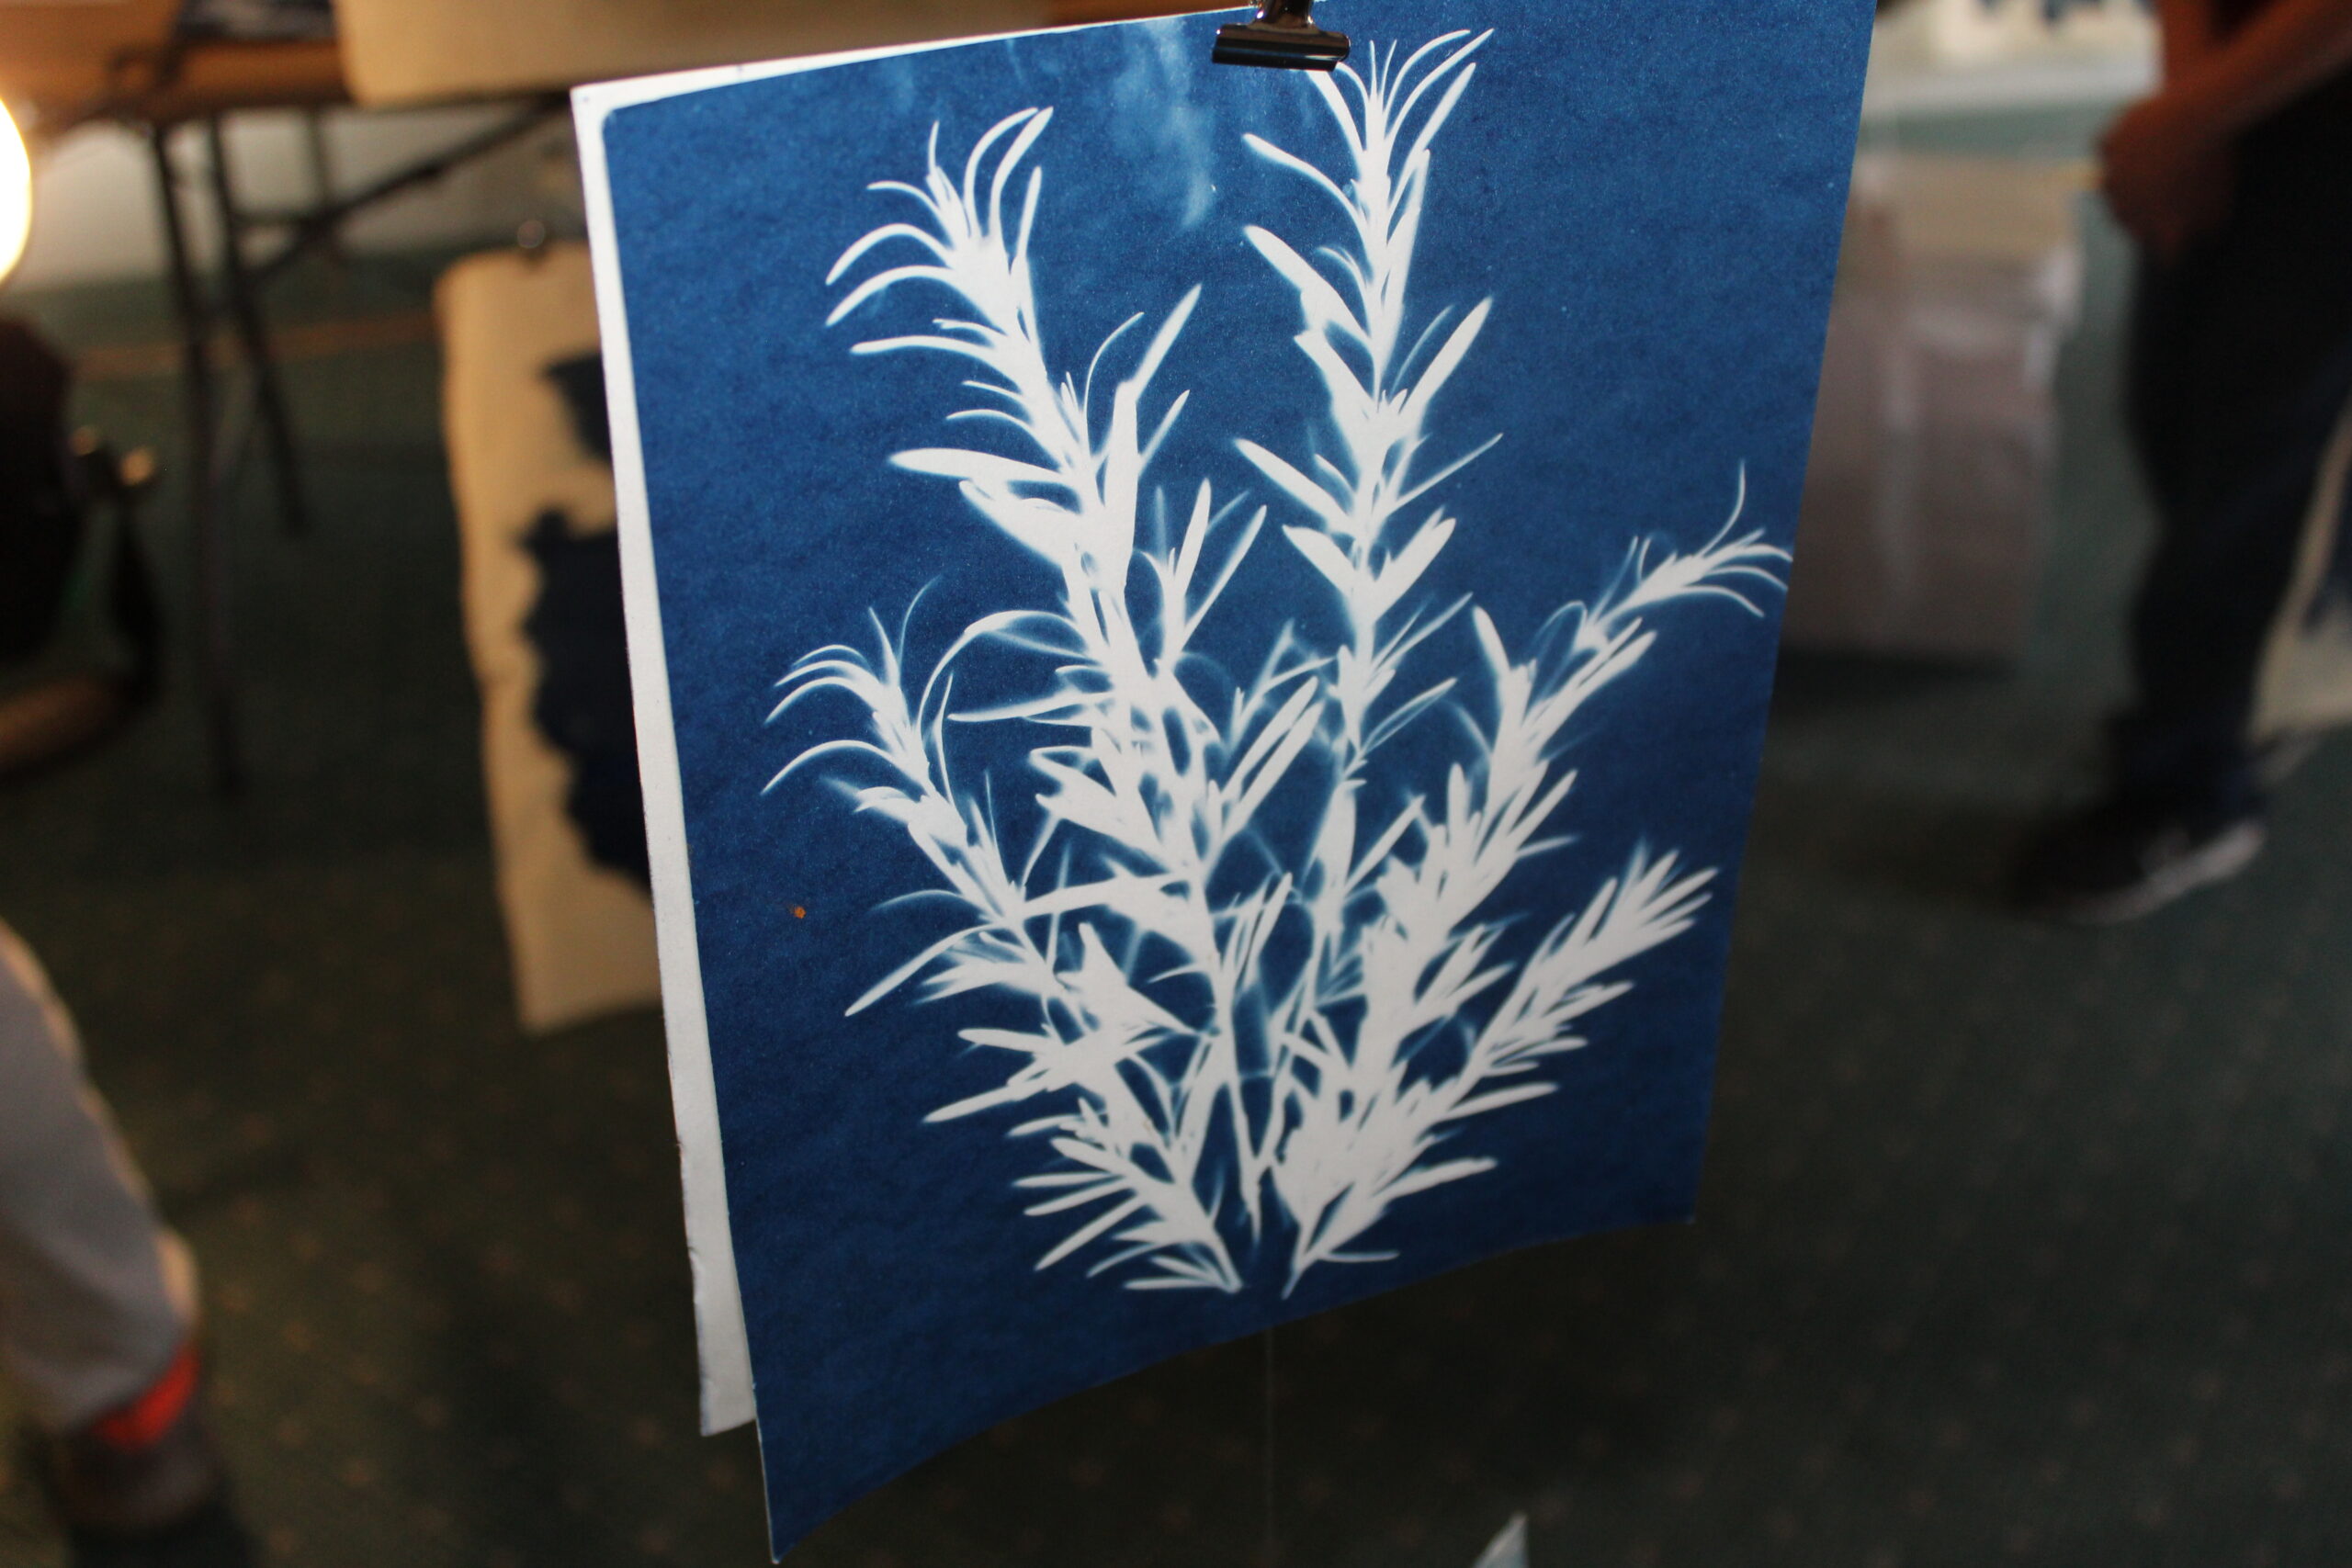 Pressed grass, with a blue background.